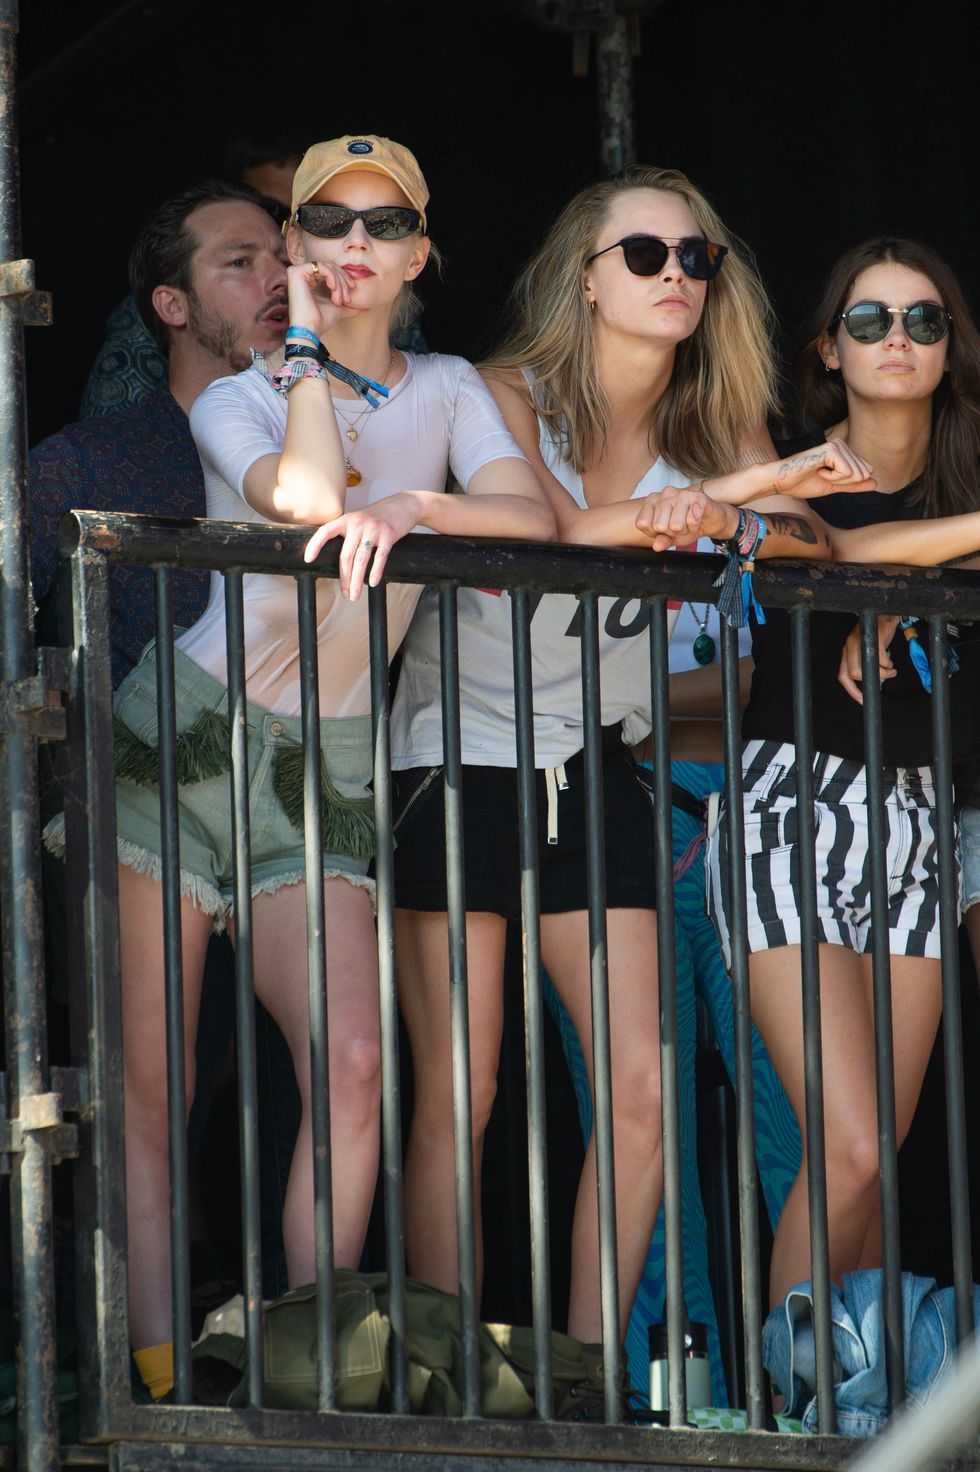 glastonbury, england june 29 anya taylor joy and cara delevingne watch the last garden party perform during day four of glastonbury festival 2024 at worthy farm, pilton on june 29, 2024 in glastonbury, england founded by michael eavis in 1970, glastonbury festival features around 3,000 performances across over 80 stages renowned for its vibrant atmosphere and iconic pyramid stage, the festival offers a diverse lineup of music and arts, embodying a spirit of community, creativity, and environmental consciousness photo by joseph okpakowireimage